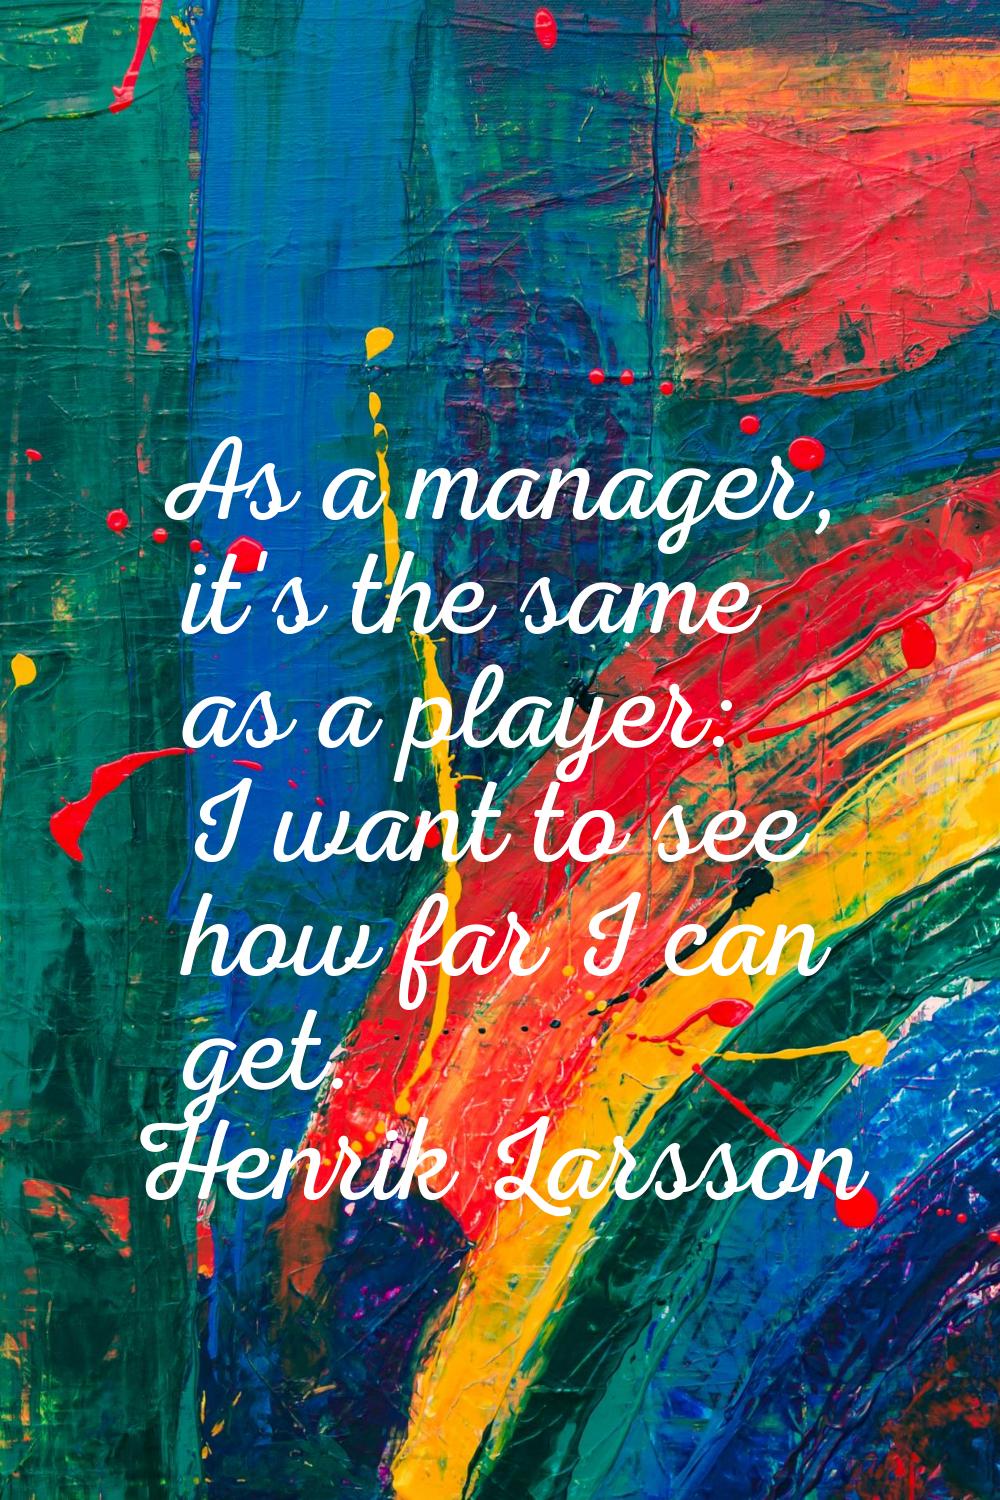 As a manager, it's the same as a player: I want to see how far I can get.